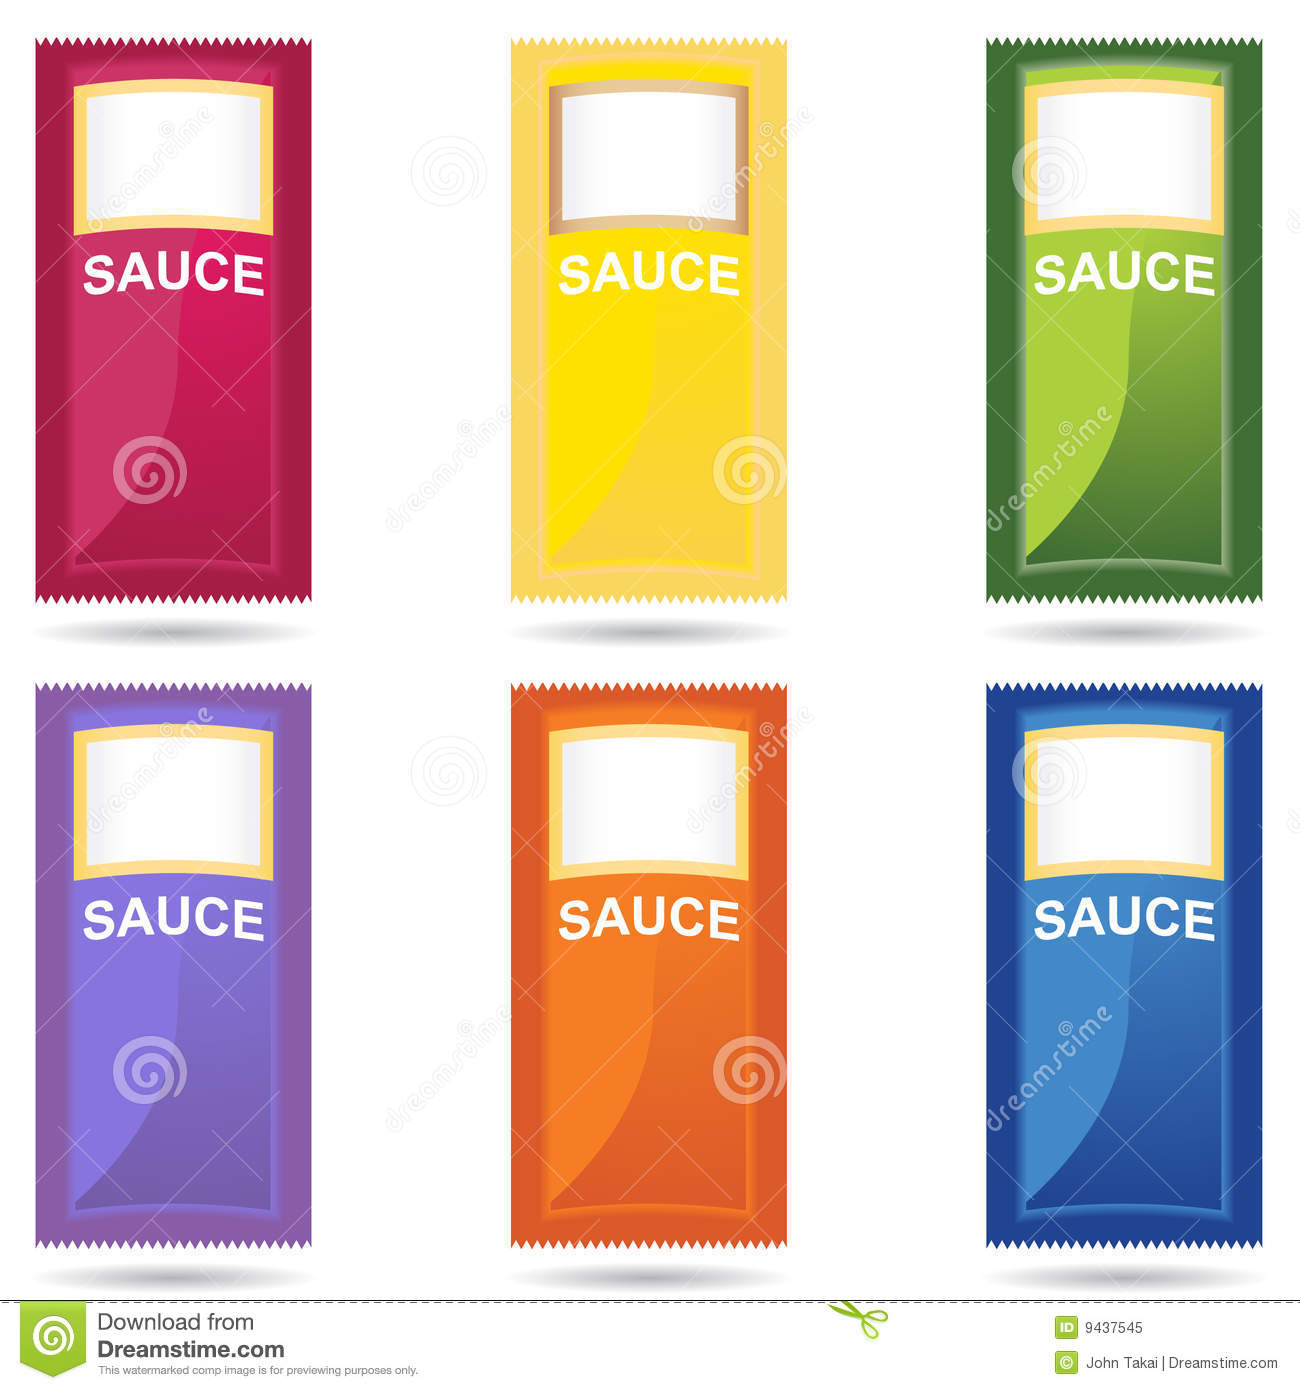 Condiment Packaging Royalty Free Stock Photo   Image  9437545